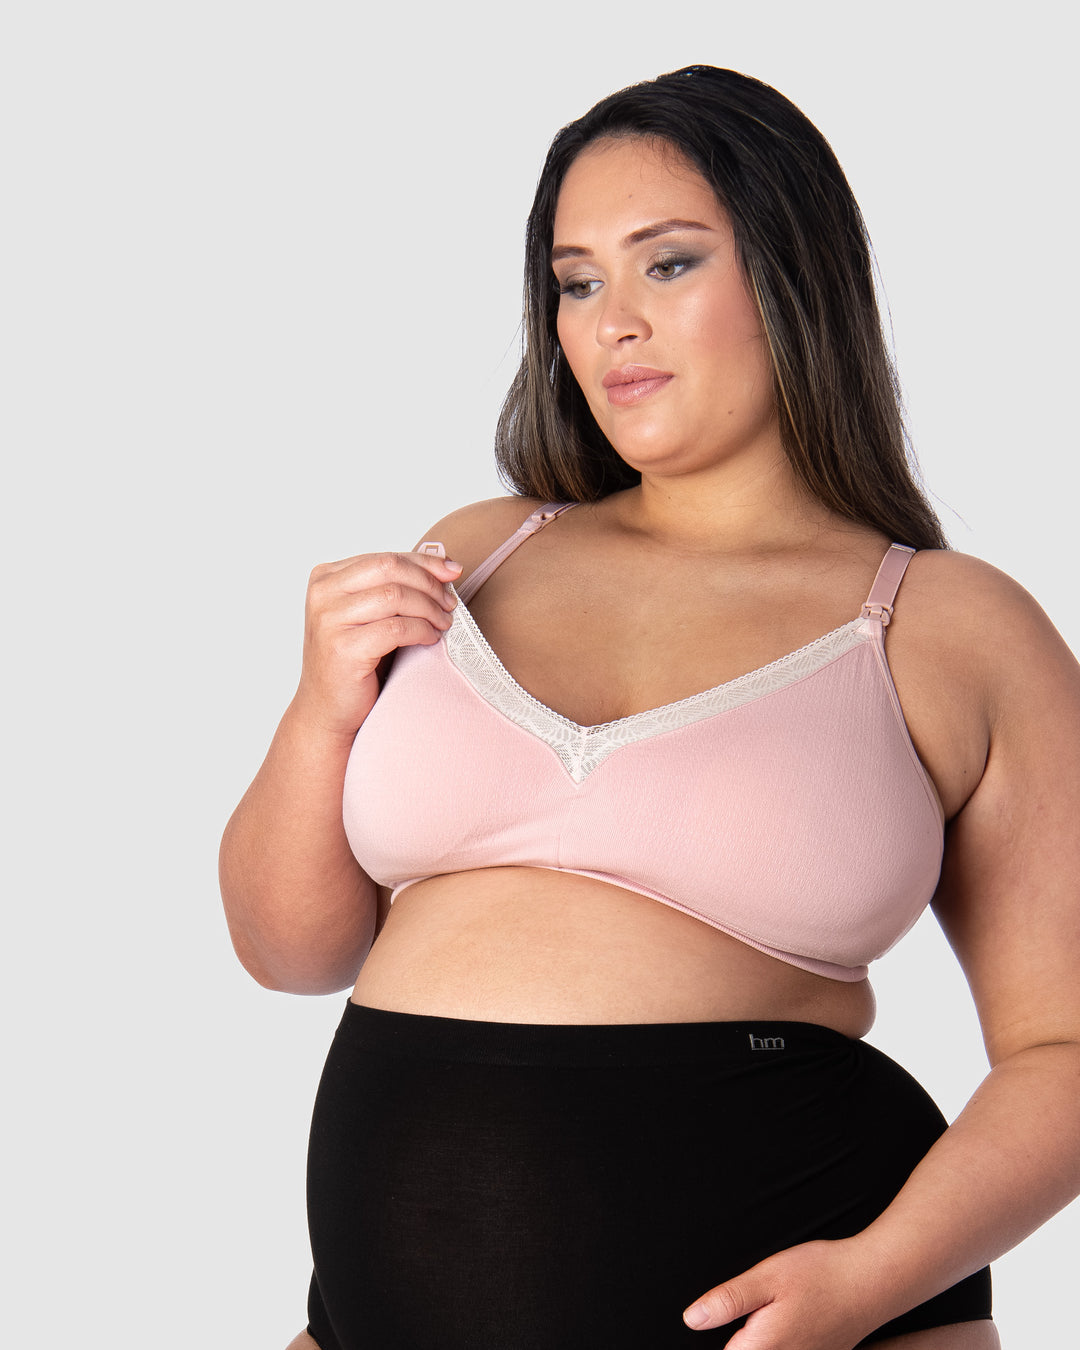 Introducing our newest Nursing Bra: Caress in Lotus Pink and Black